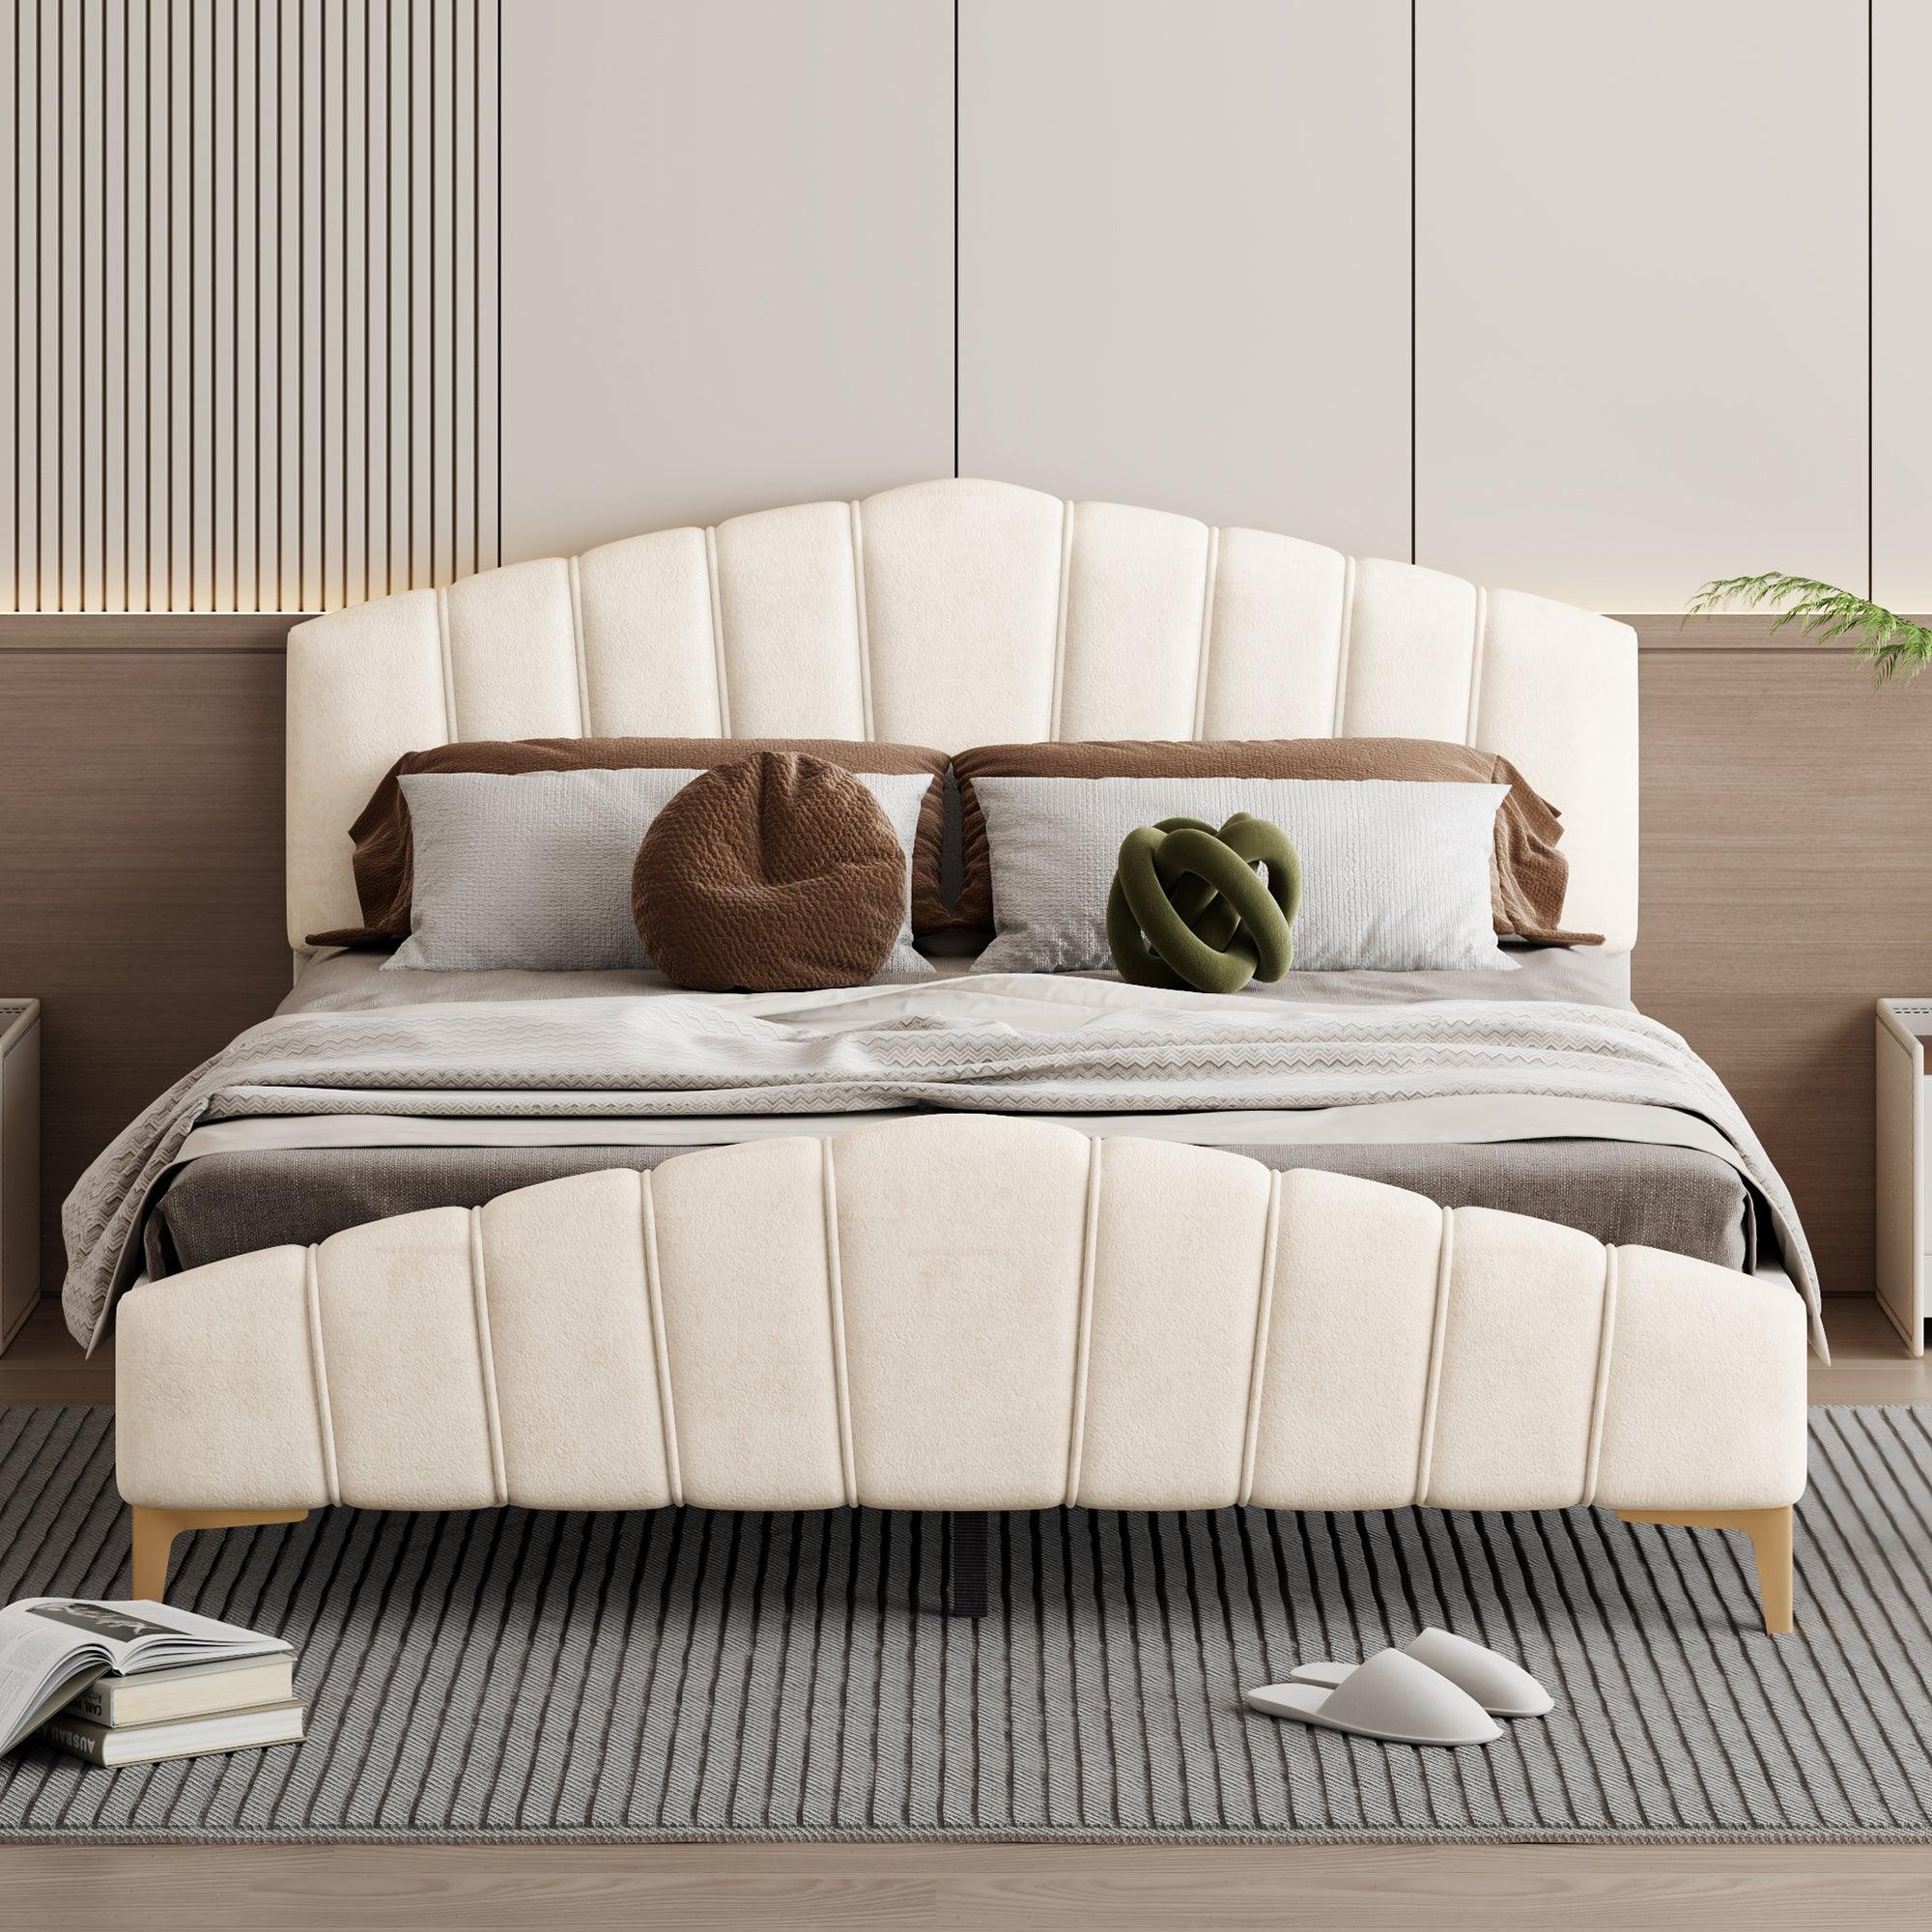 🆓🚛 Queen Size Velvet Platform Bed With Thick Fabric, Stylish Stripe Decorated Bedboard & Elegant Metal Bed Leg, Beige